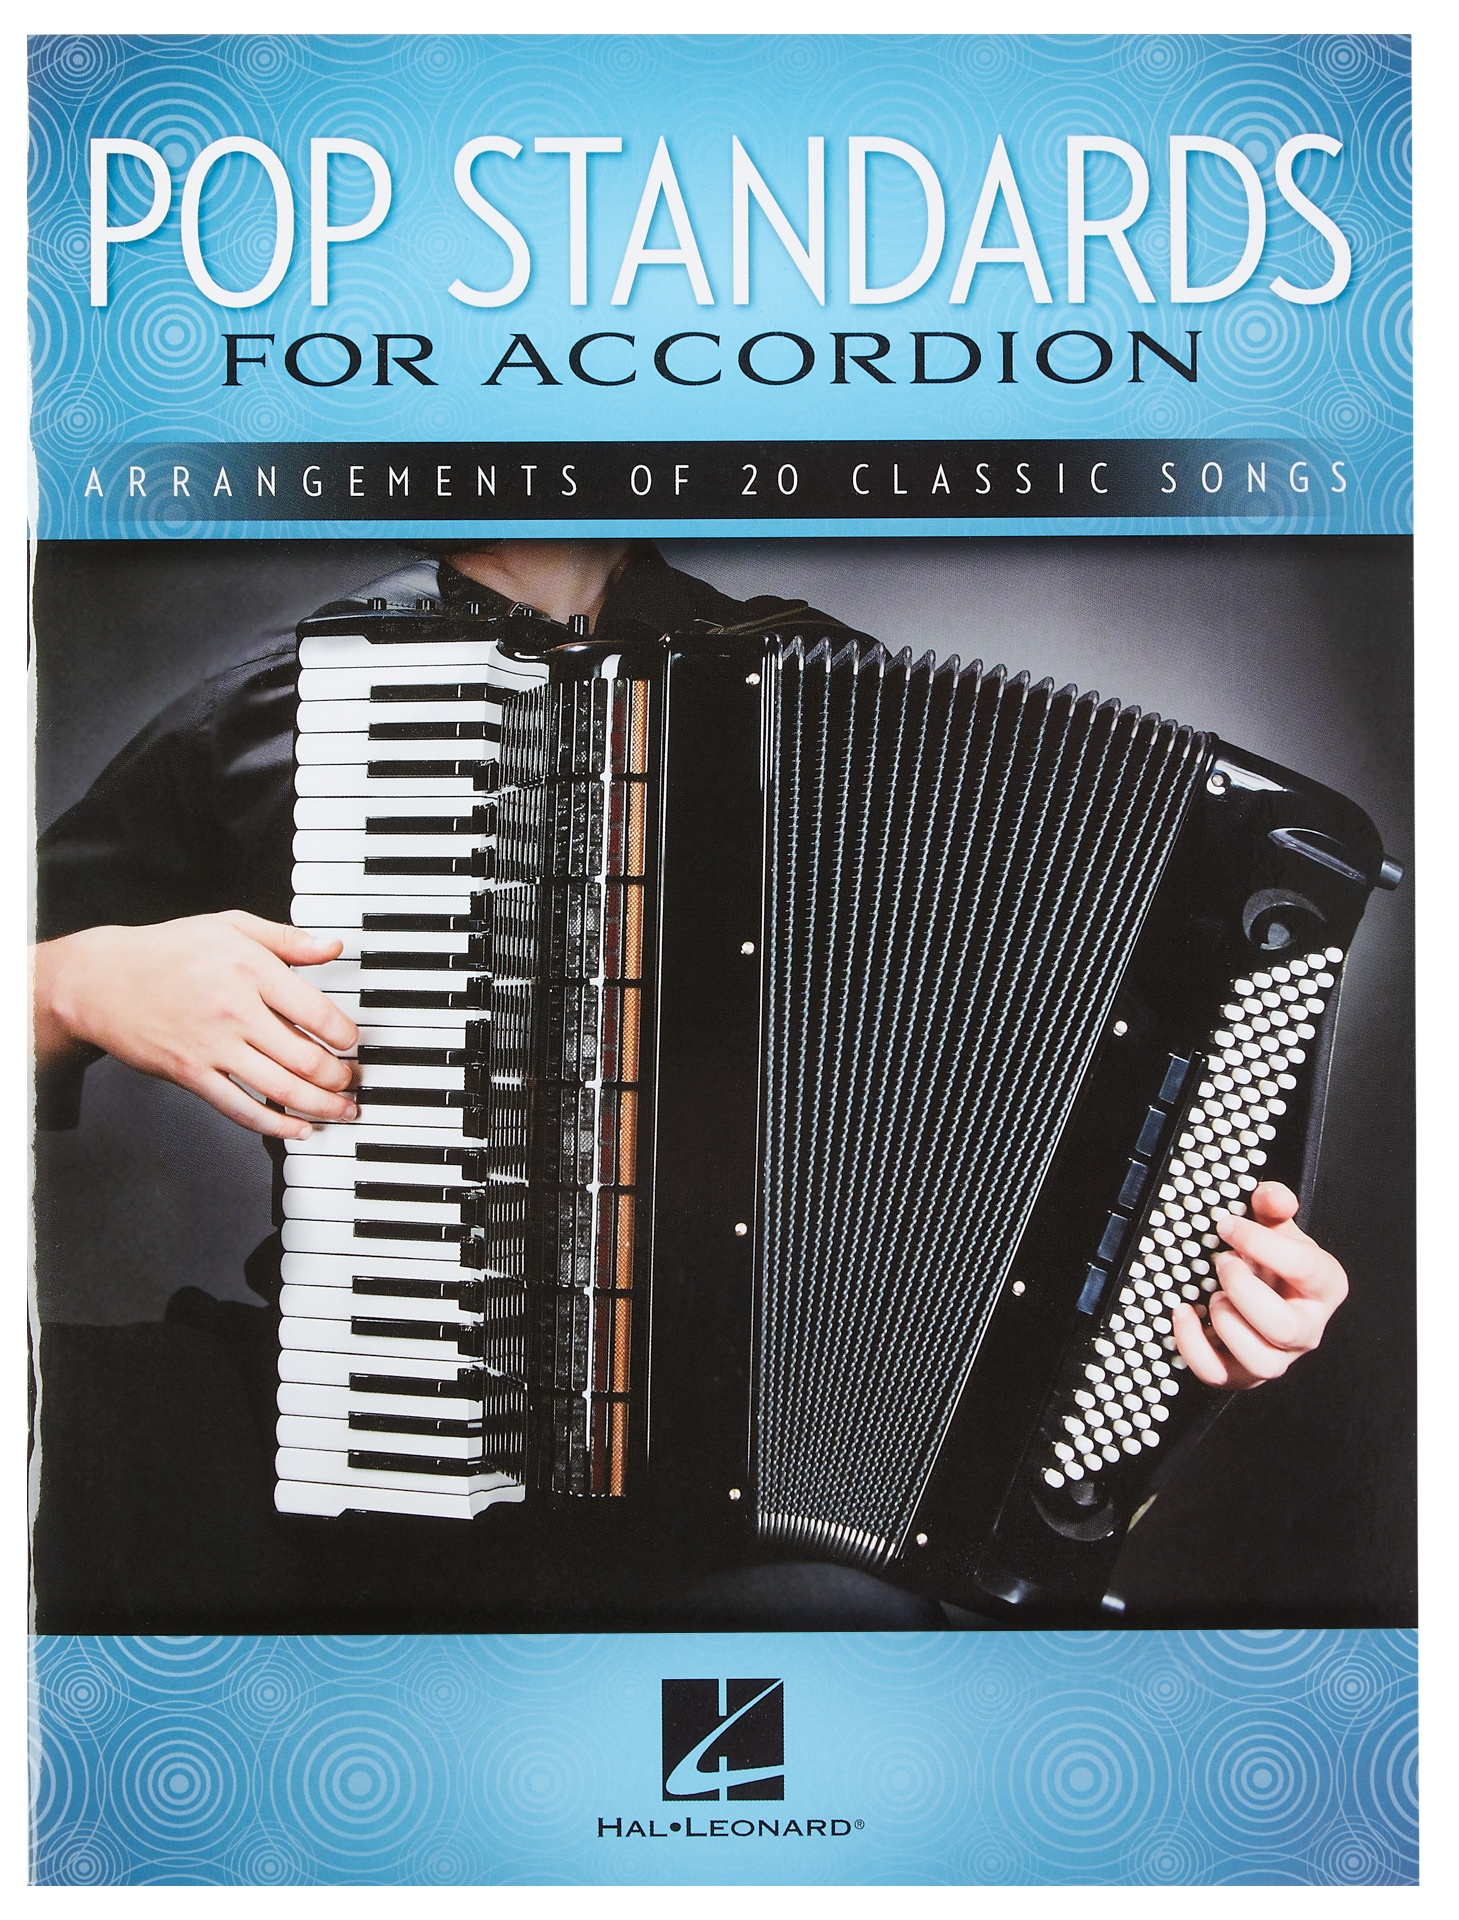 MS Pop Standards For Accordion: Arrangements Of 20 Classic Songs